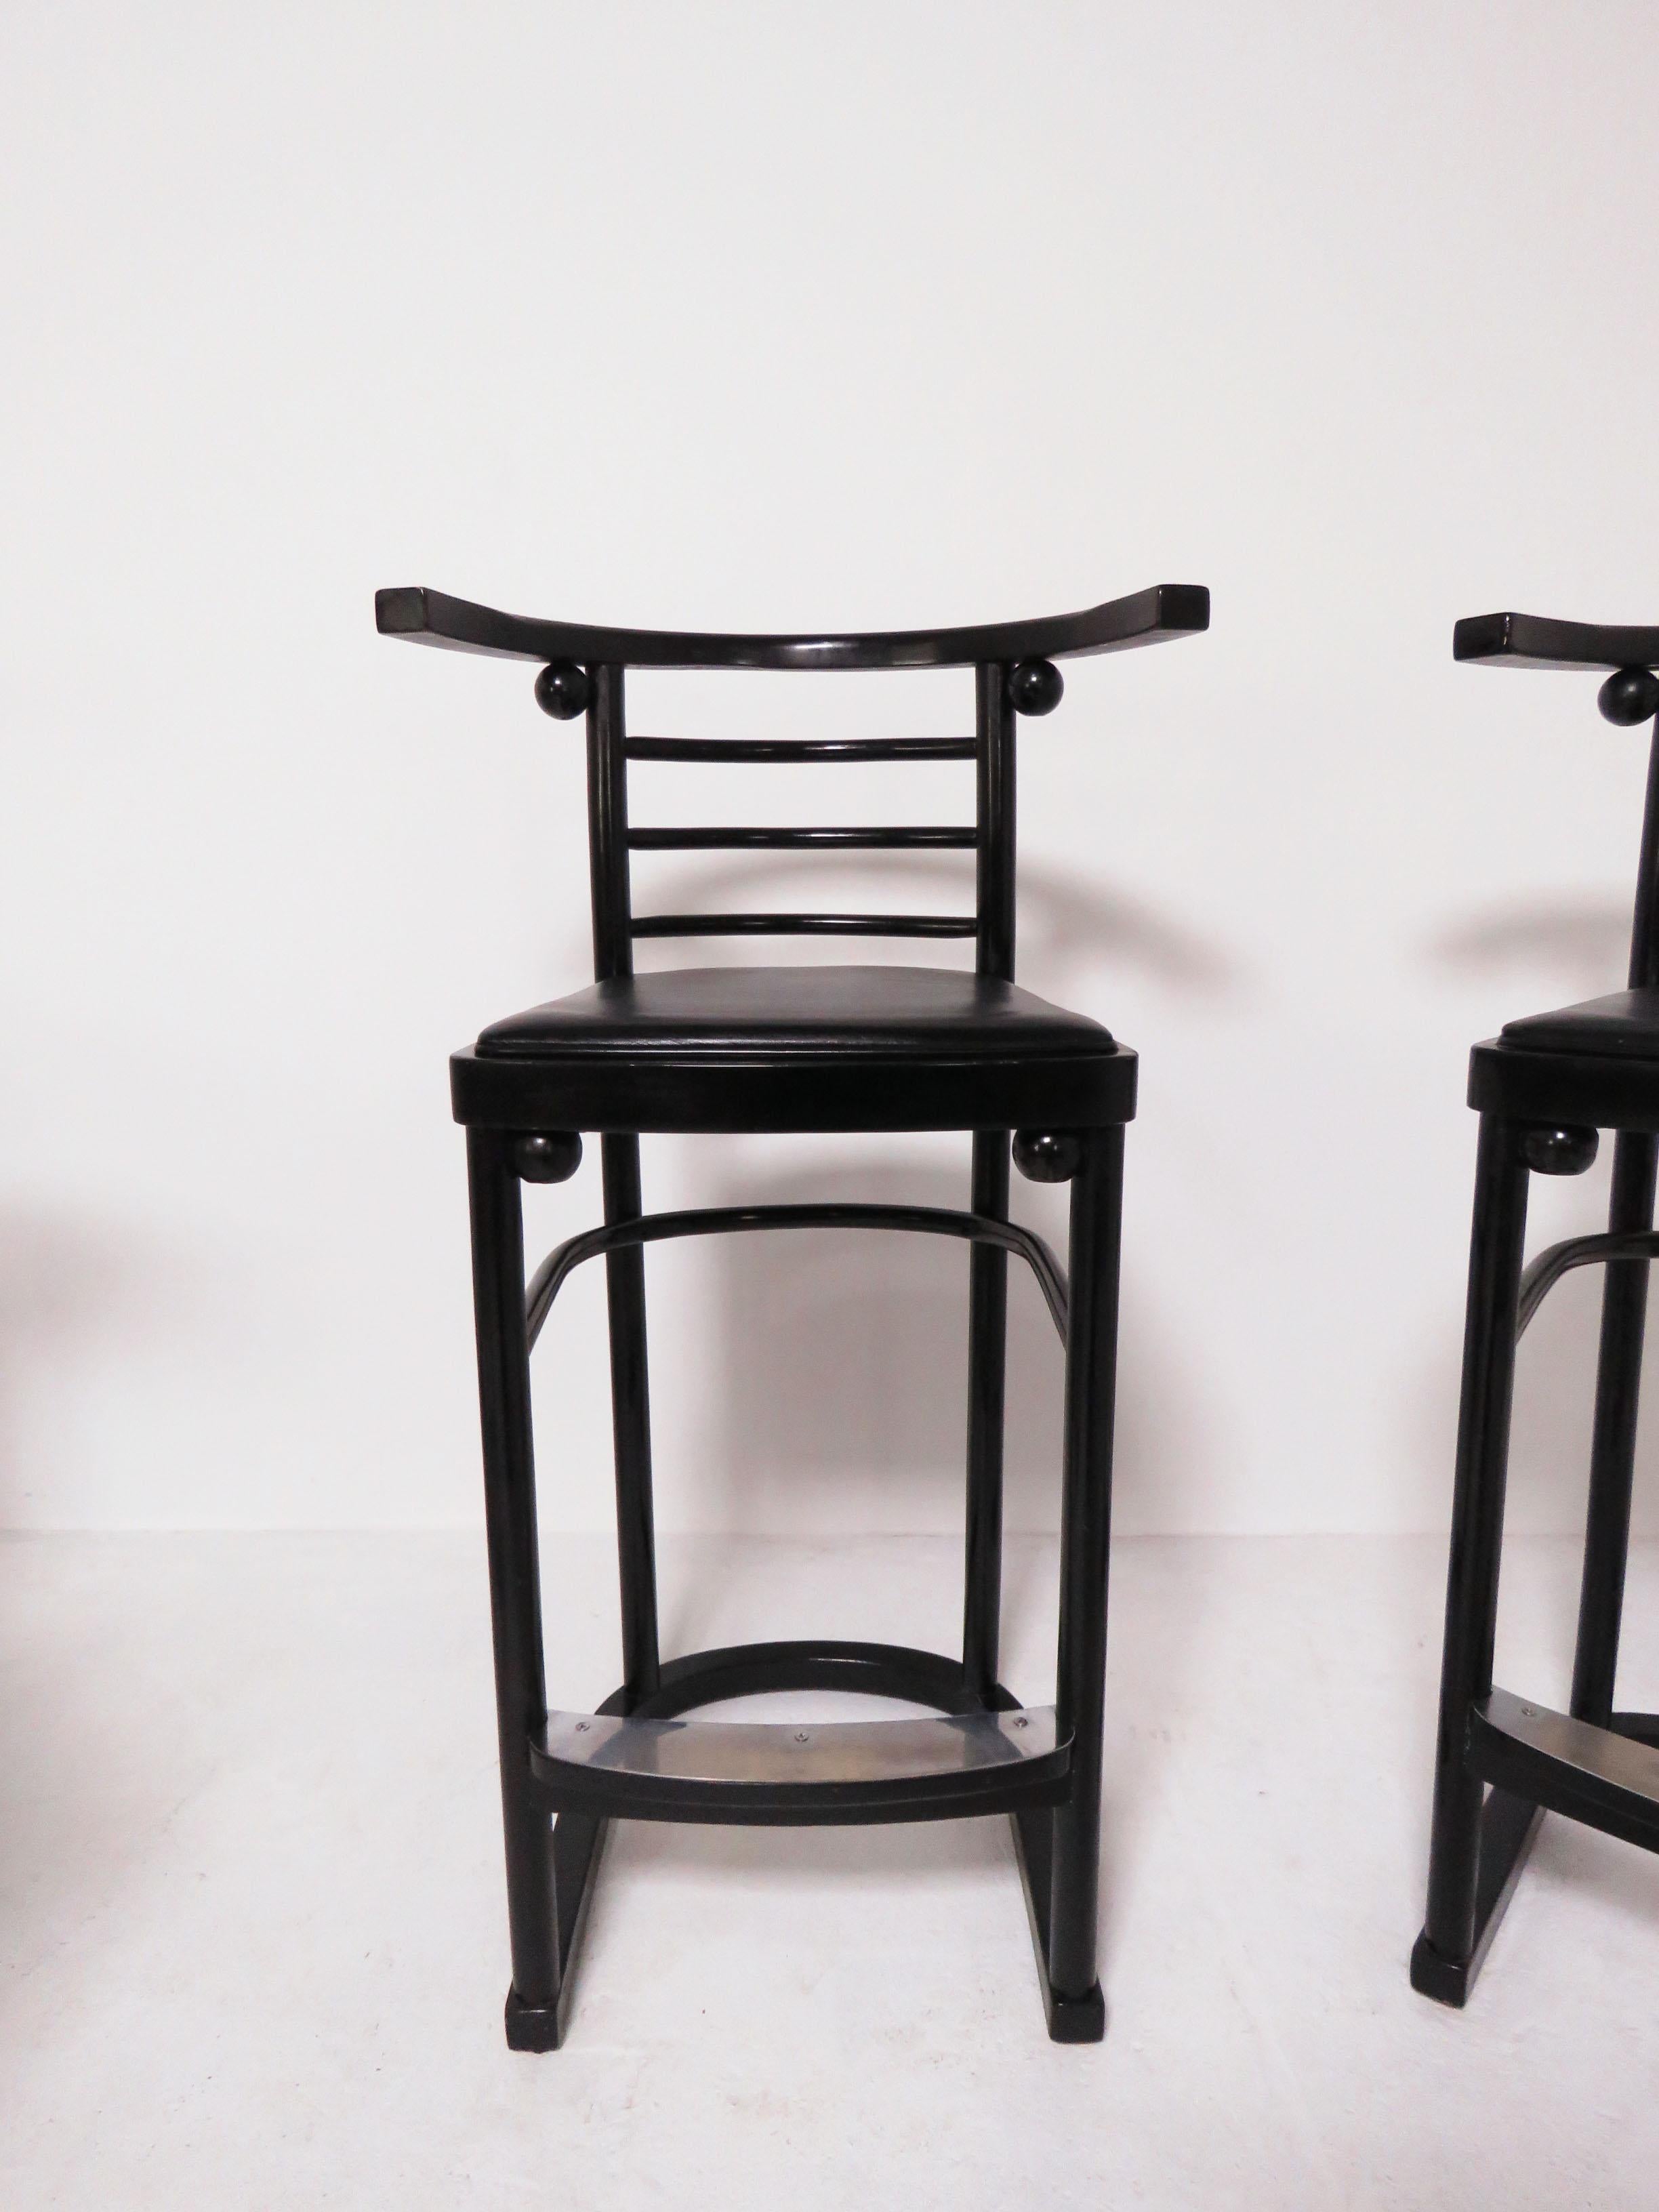 Set of four “Fledermaus” cabaret bar stools with genuine leather seats and stainless steel foot rests. Originally designed by Josef Hoffmann in the early 1900s for Vienna’s famed Fledermaus Cabaret, these are a midcentury 1970s Thonet production.